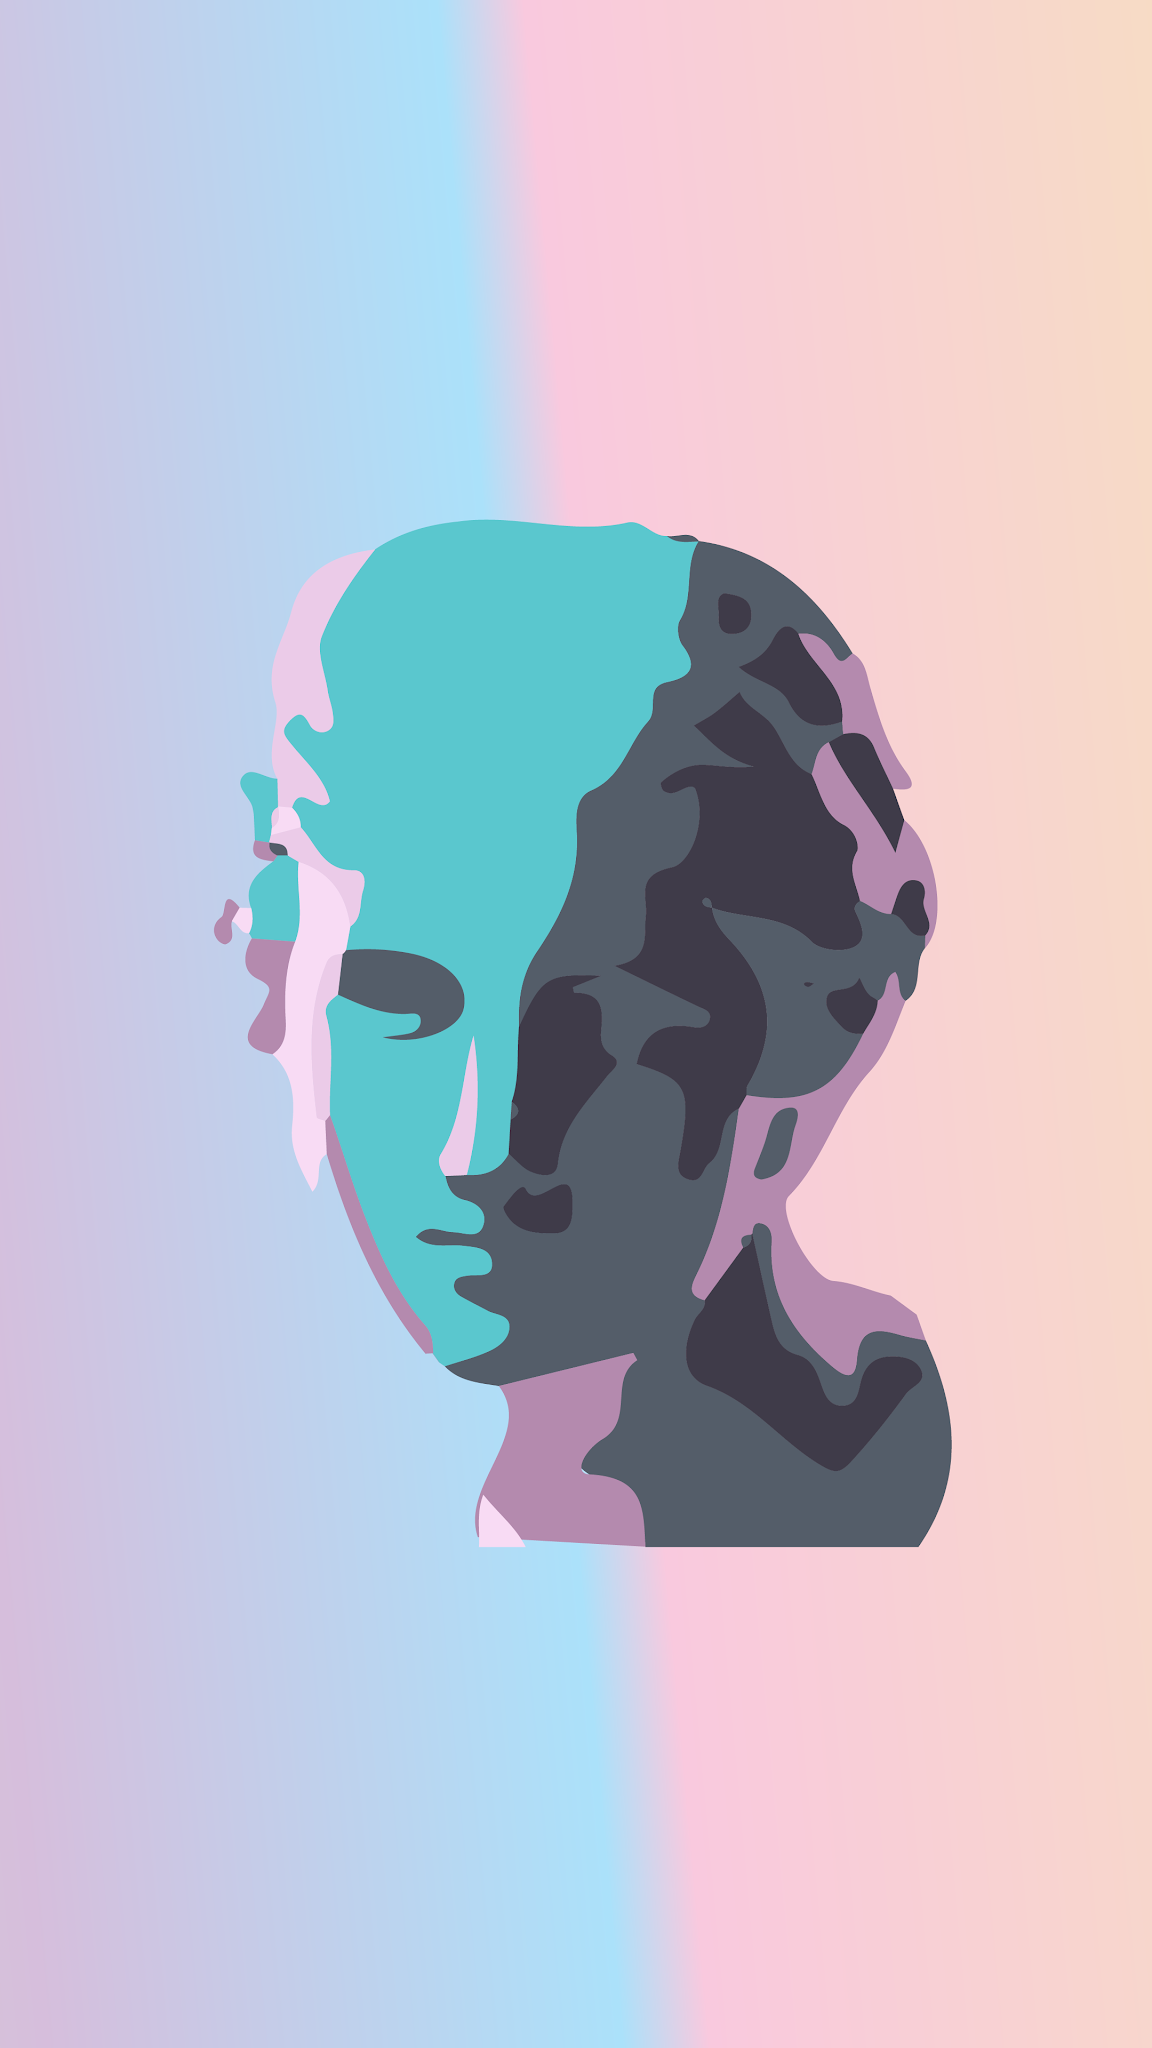 Contemporary Minimal Collage Wallpaper. Antique Statue Woman in Holography  Digital Space. Back in 80, 90s Party Vibes. Retro Zine Stock Image - Image  of funky, absurd: 231824703